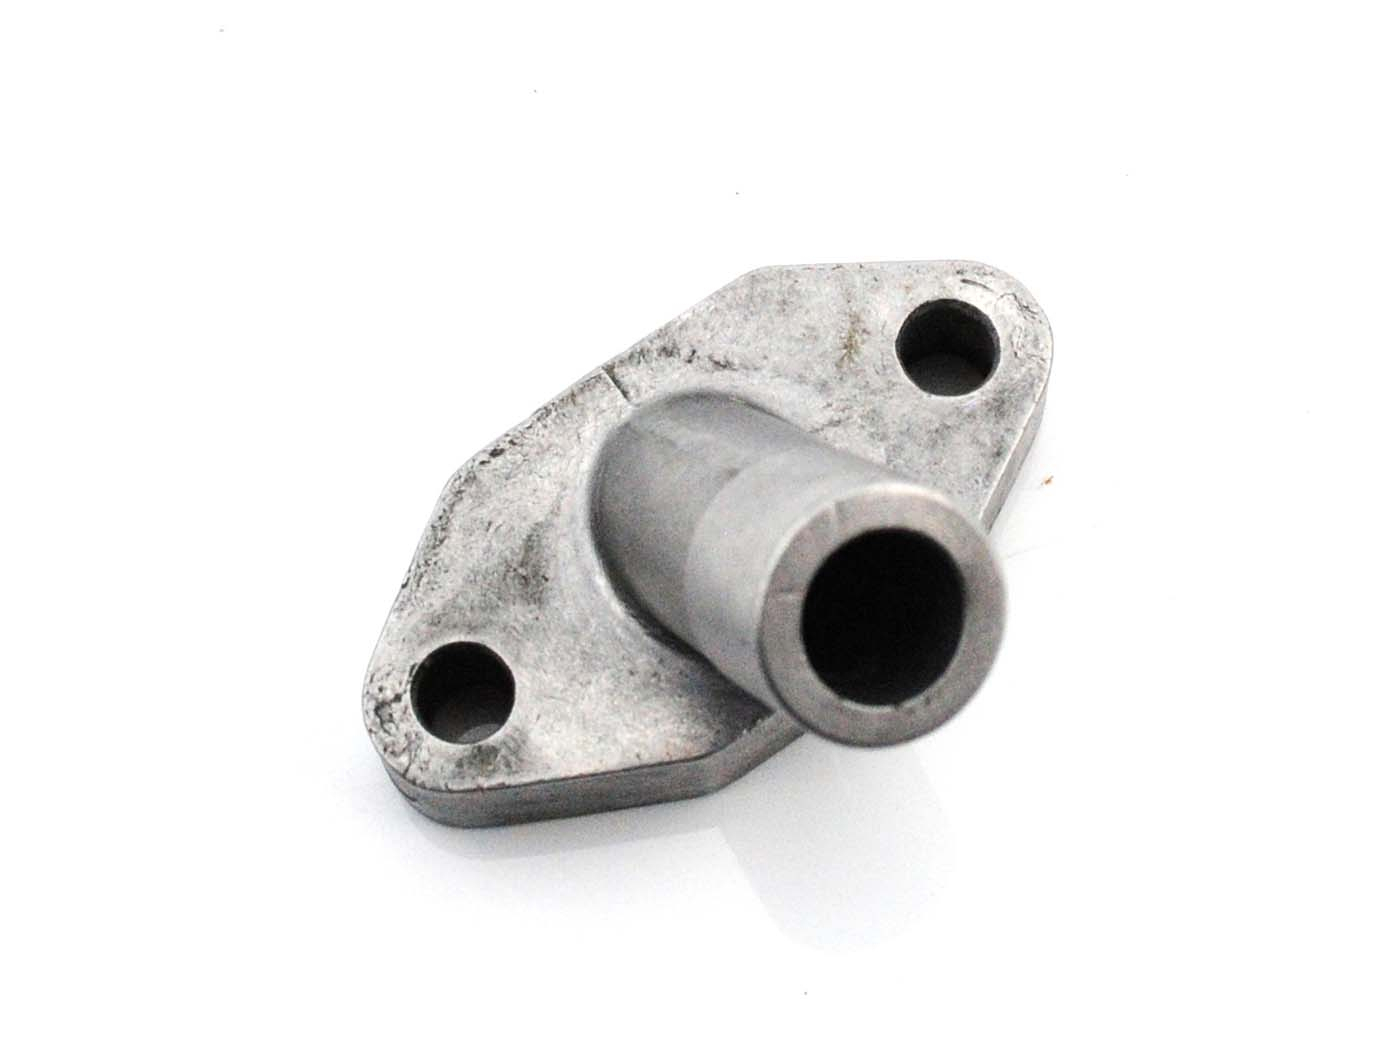 Intake Manifold Spare Part Carburetor Connection 16mm Air Passage 10mm For Zündapp M 25 Moped Type 247-02 L1